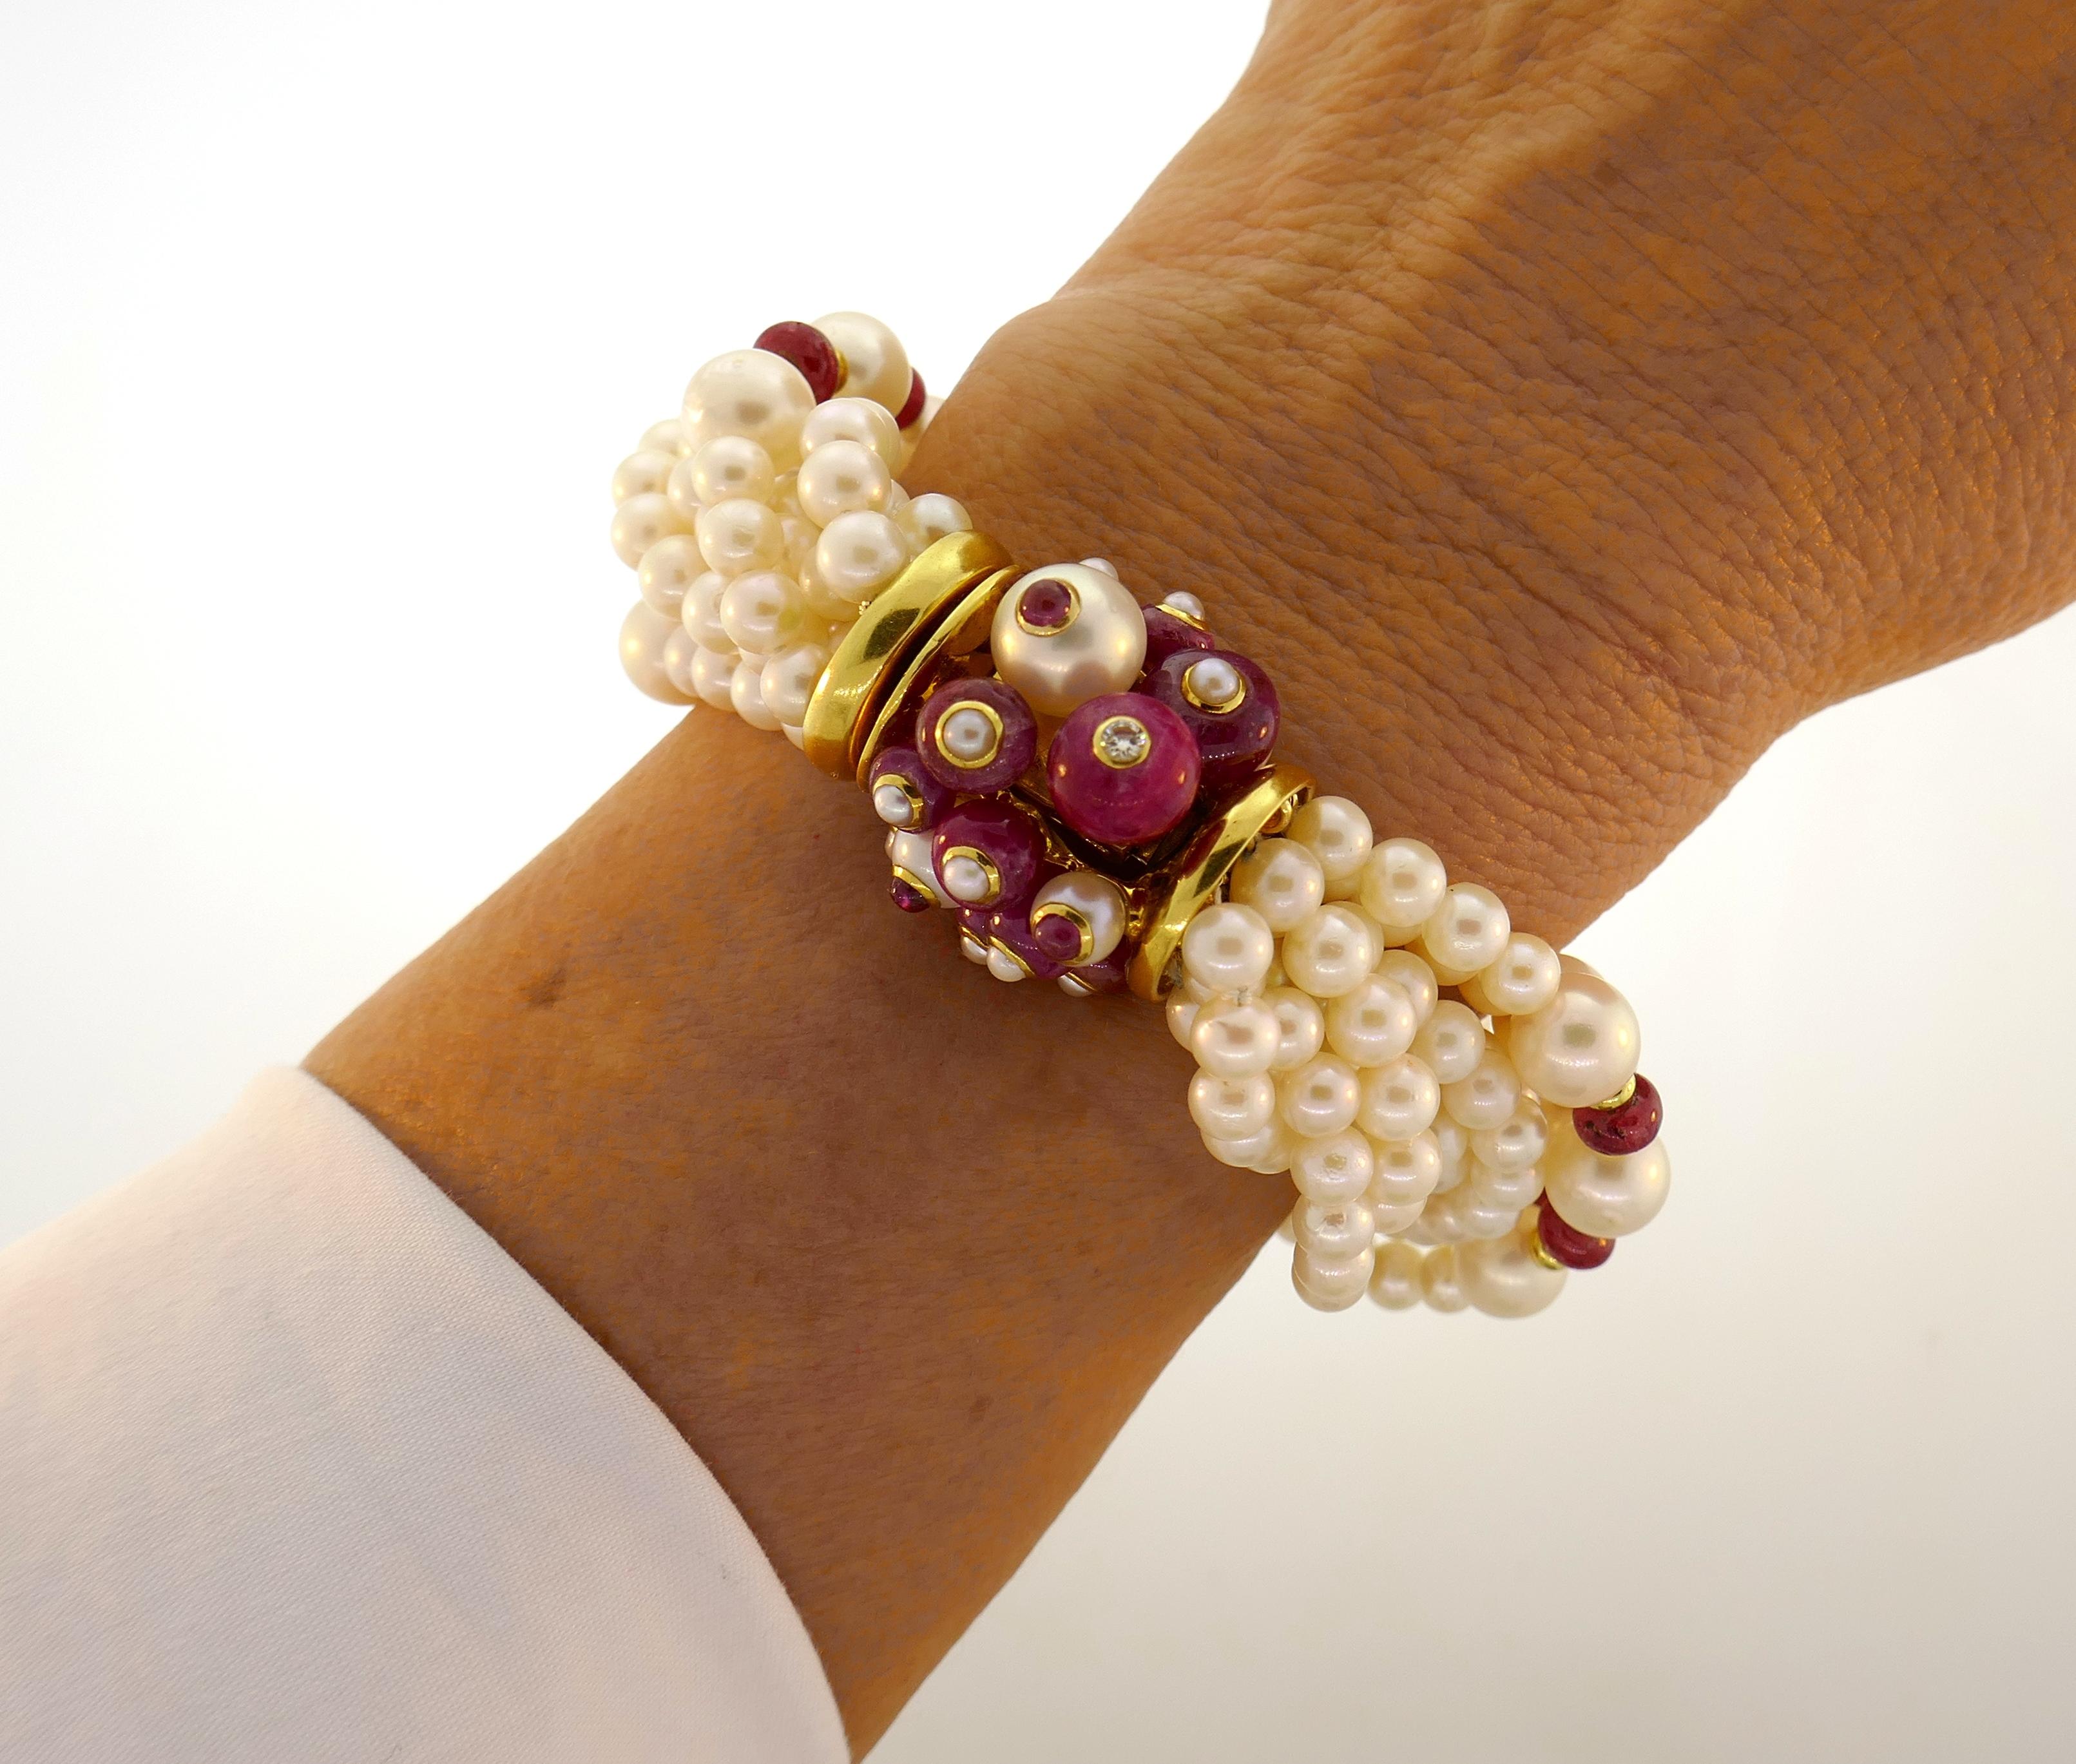 Lovely pearl with ruby accents bracelet created by Trianon. Chic, elegant and wearable, the bracelet is a great edition to your jewelry collection.
The bracelet is made of eight pearl strands accented with ruby beads and finished with 18 karat